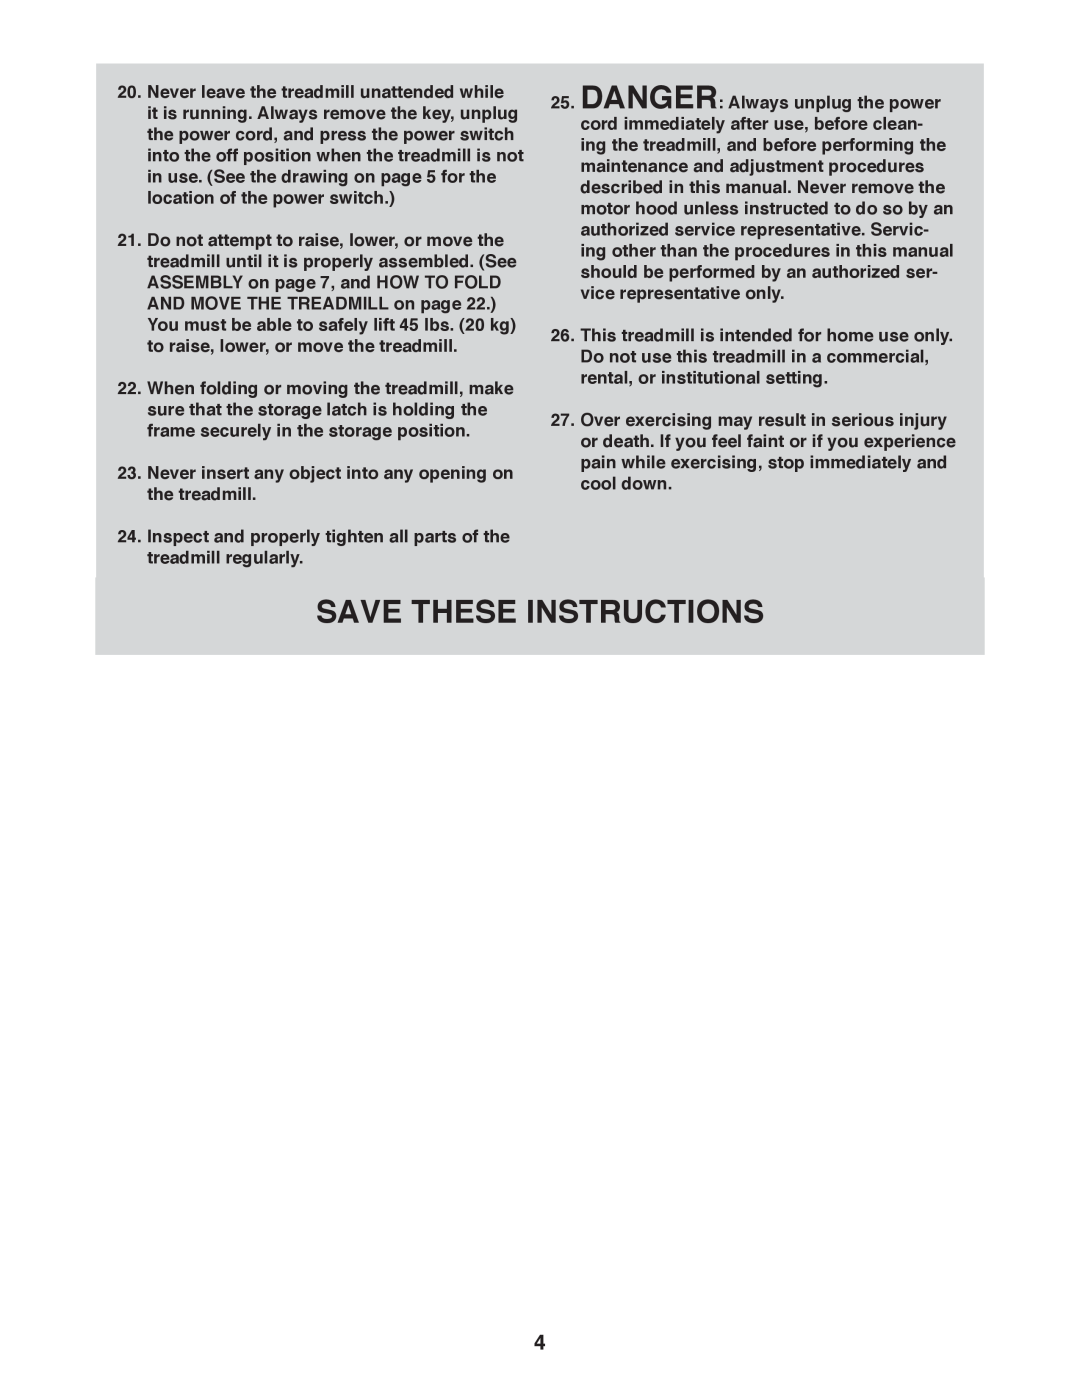 Sears NTL61011.1 user manual Save These Instructions 